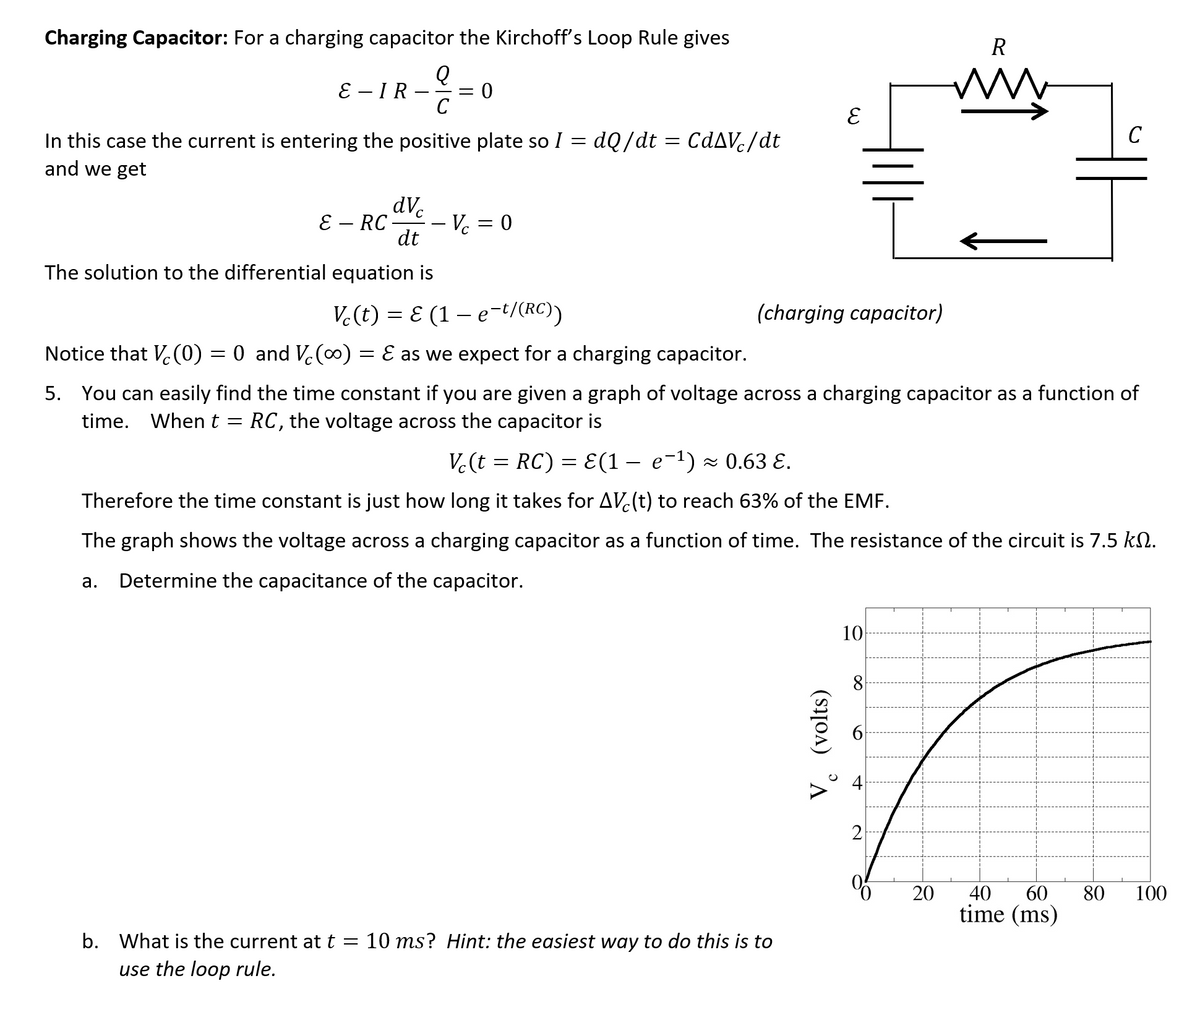 Charging Capacitor: For a charging capacitor the Kirchoff's Loop Rule gives
R
E – IR
C
ww
C
In this case the current is entering the positive plate so I = dQ/dt = CdAVc/dt
and we get
dVc
E – RC
- Vc = 0
dt
The solution to the differential equation is
V.(t) = E (1 – e-t/(RC))
(charging capacitor)
Notice that V.(0) = 0 and V.(0) = E as we expect for a charging capacitor.
5. You can easily find the time constant if you are given a graph of voltage across a charging capacitor as a function of
time. Whent = RC, the voltage across the capacitor is
V.(t = RC) = E(1 – e-1) × 0.63 E.
Therefore the time constant is just how long it takes for AV(t) to reach 63% of the EMF.
The graph shows the voltage across a charging capacitor as a function of time. The resistance of the circuit is 7.5 kN.
а.
Determine the capacitance of the capacitor.
10
8
60
40
time (ms)
20
80
100
b. What is the current at t =
10 ms? Hint: the easiest way to do this is to
use the loop rule.
(volts)
4.
